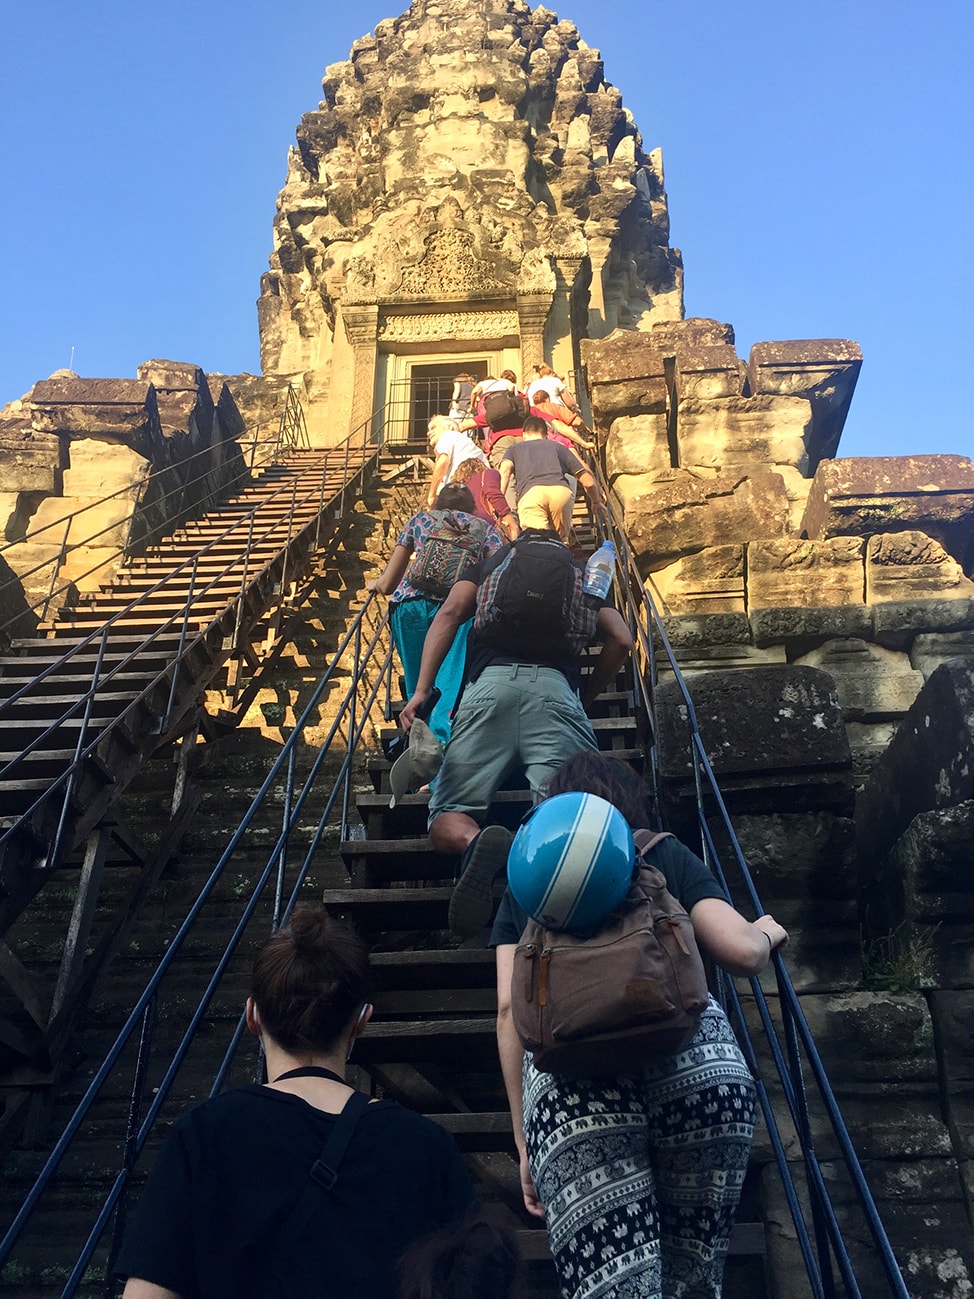 Image of the climb up to the Bakan section of Angkor Wat